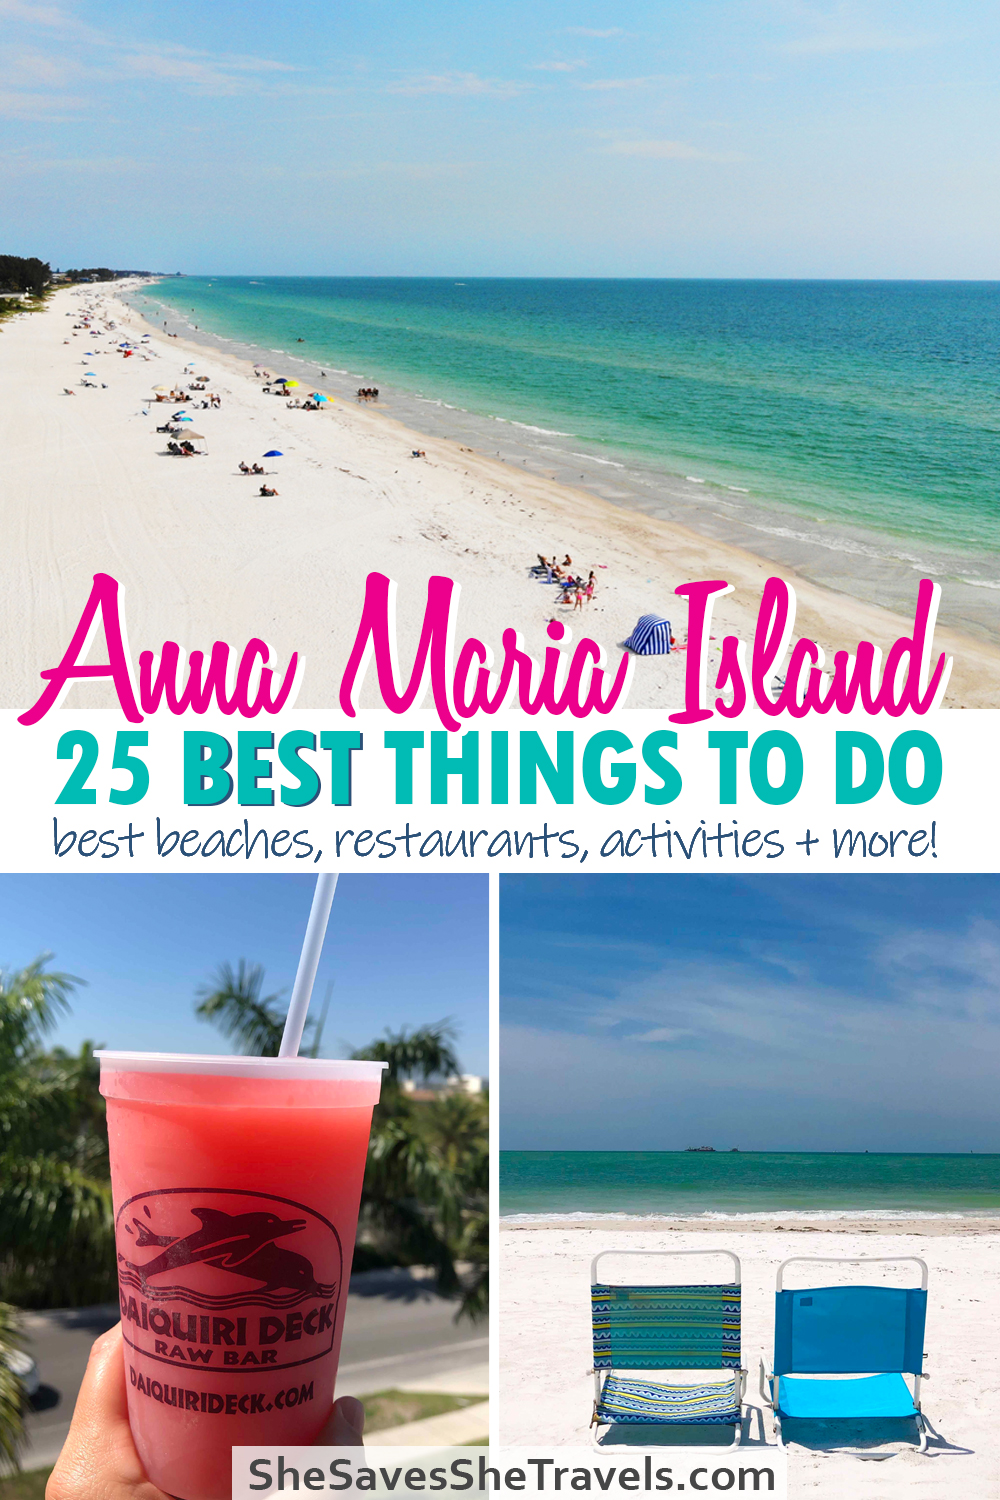 Anna Maria island 25 best things to do best b beaches, restaurants, activities and more with images of beach, drink in cup and chairs on beach